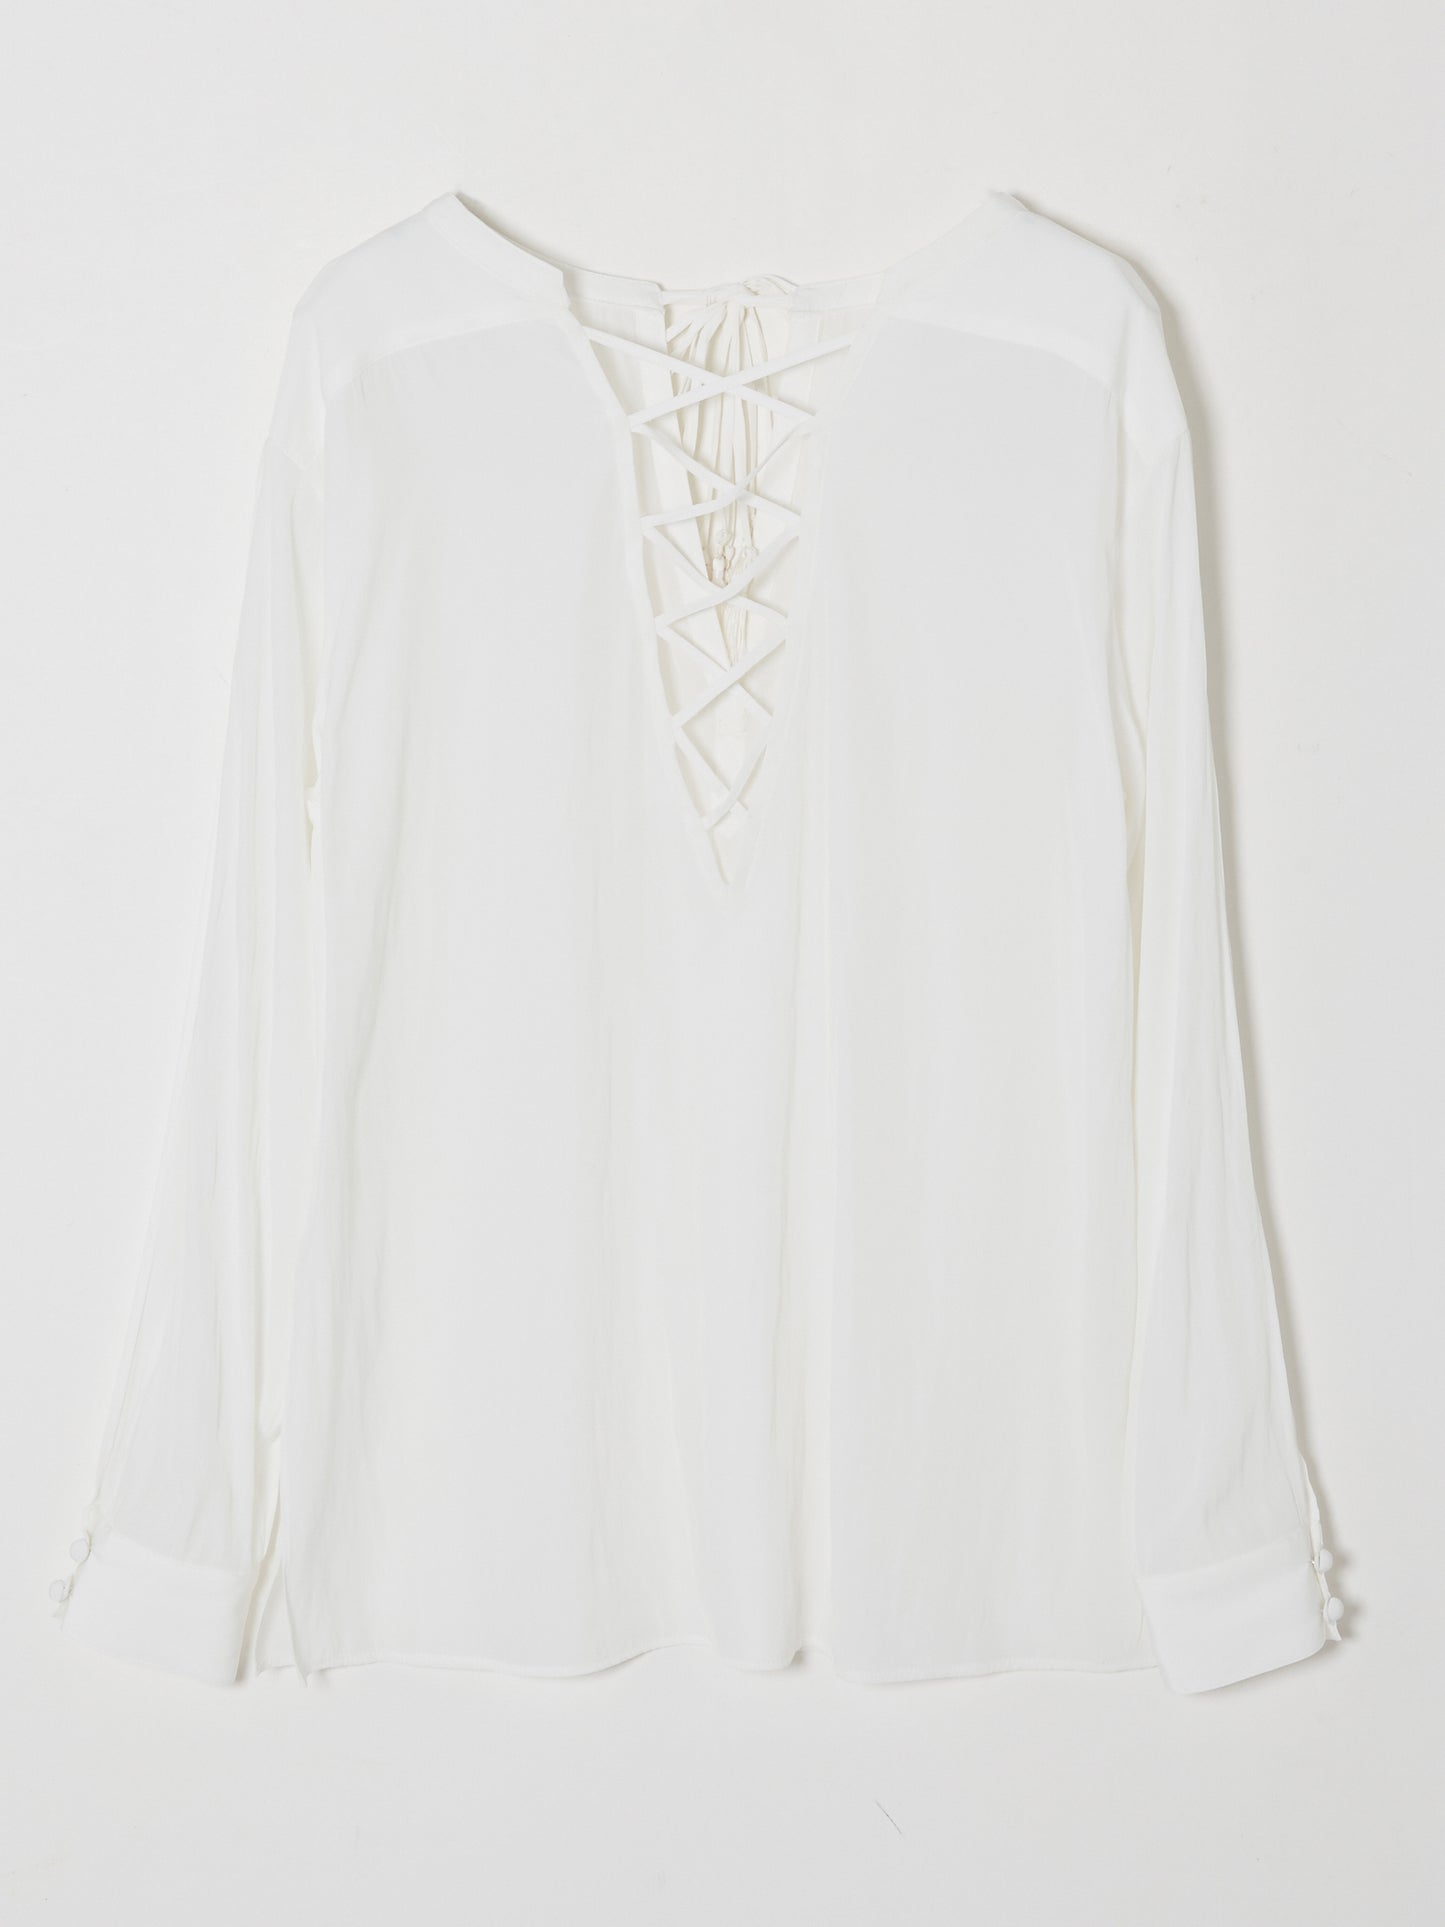 2way tassel blouse【Delivery in February 2024】